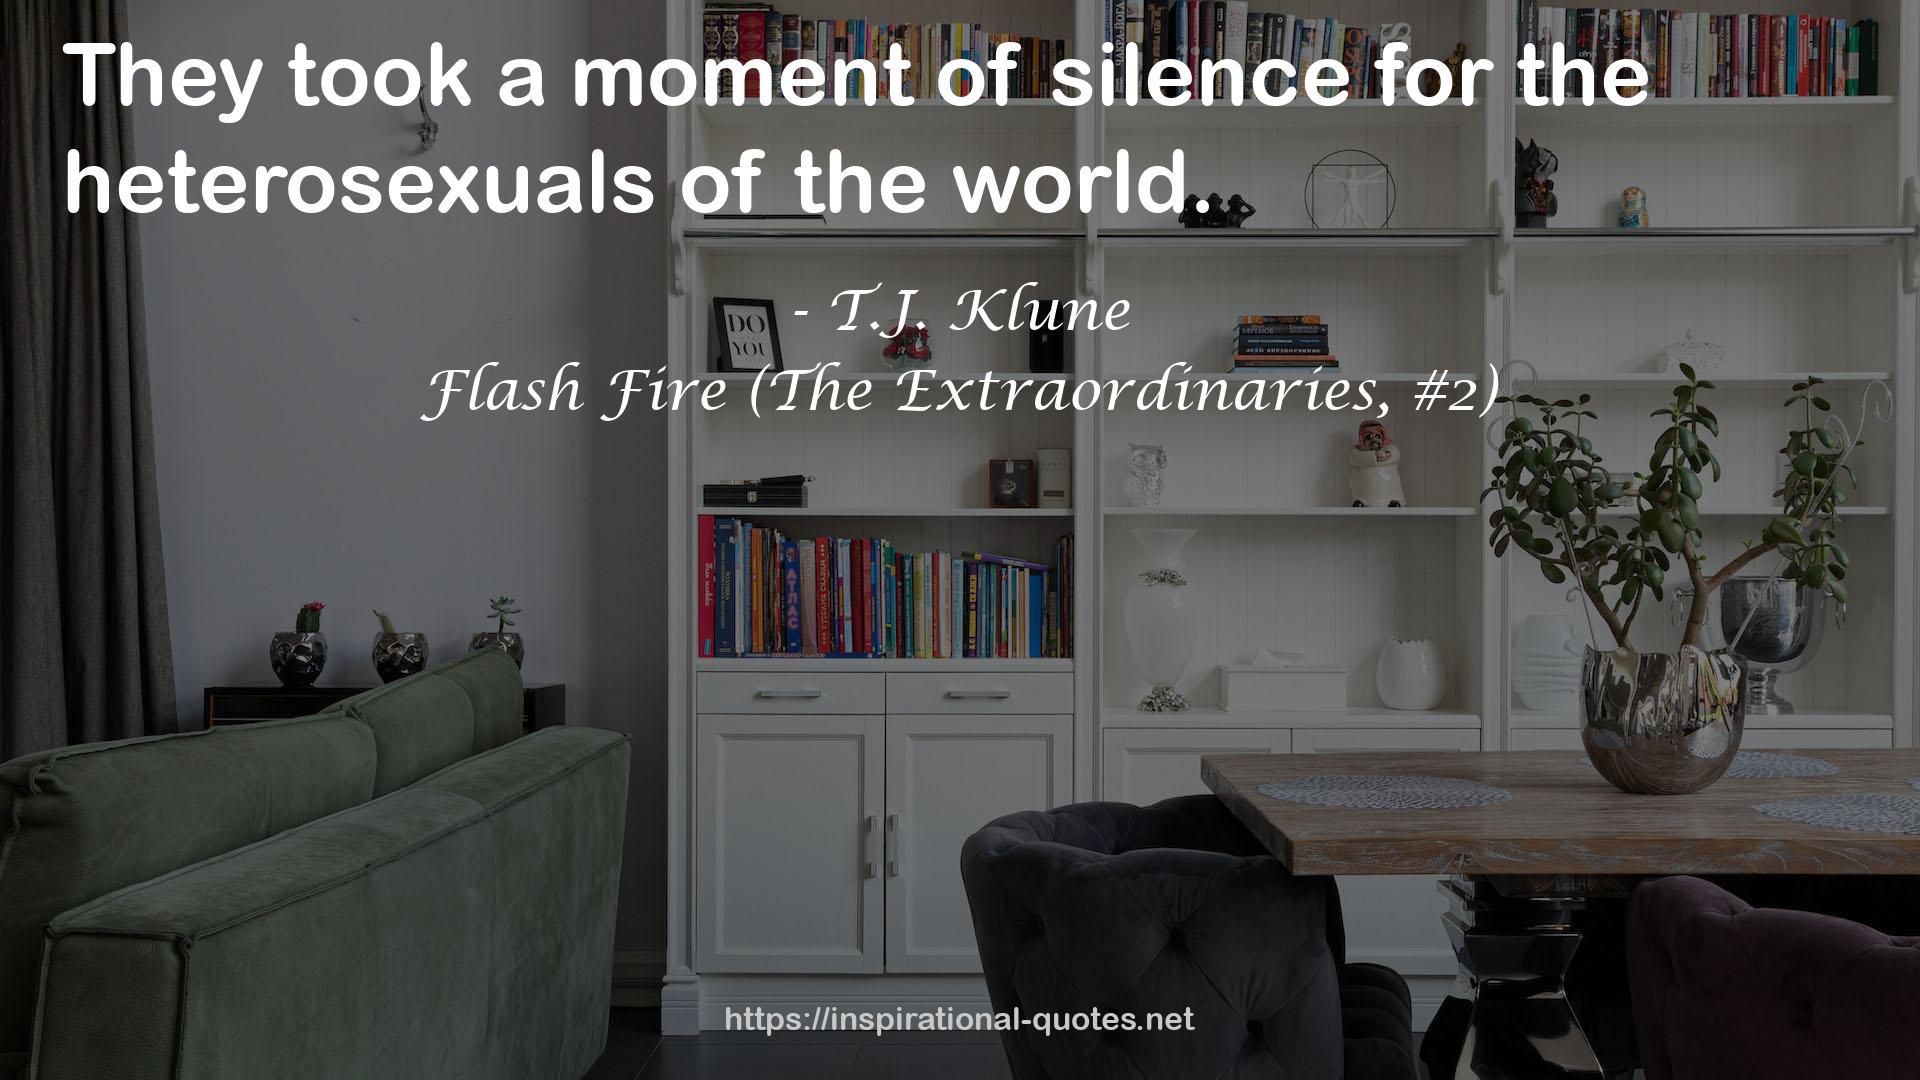 Flash Fire (The Extraordinaries, #2) QUOTES